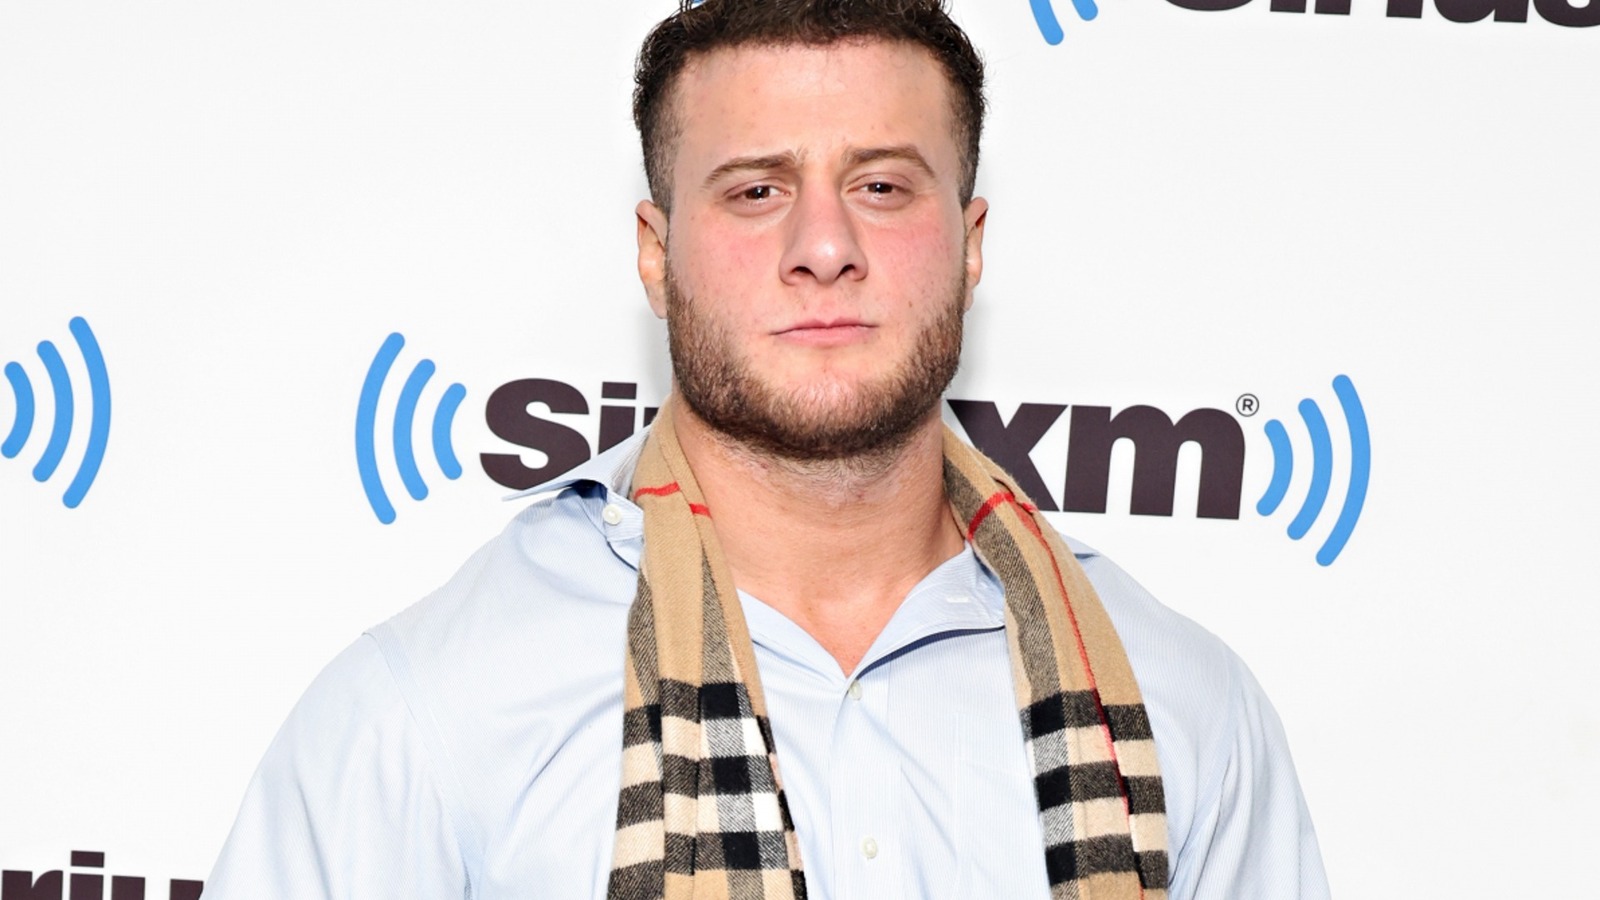 Kevin Von Erich Likens Meeting Former AEW Champ MJF To This WWE Hall Of Famer